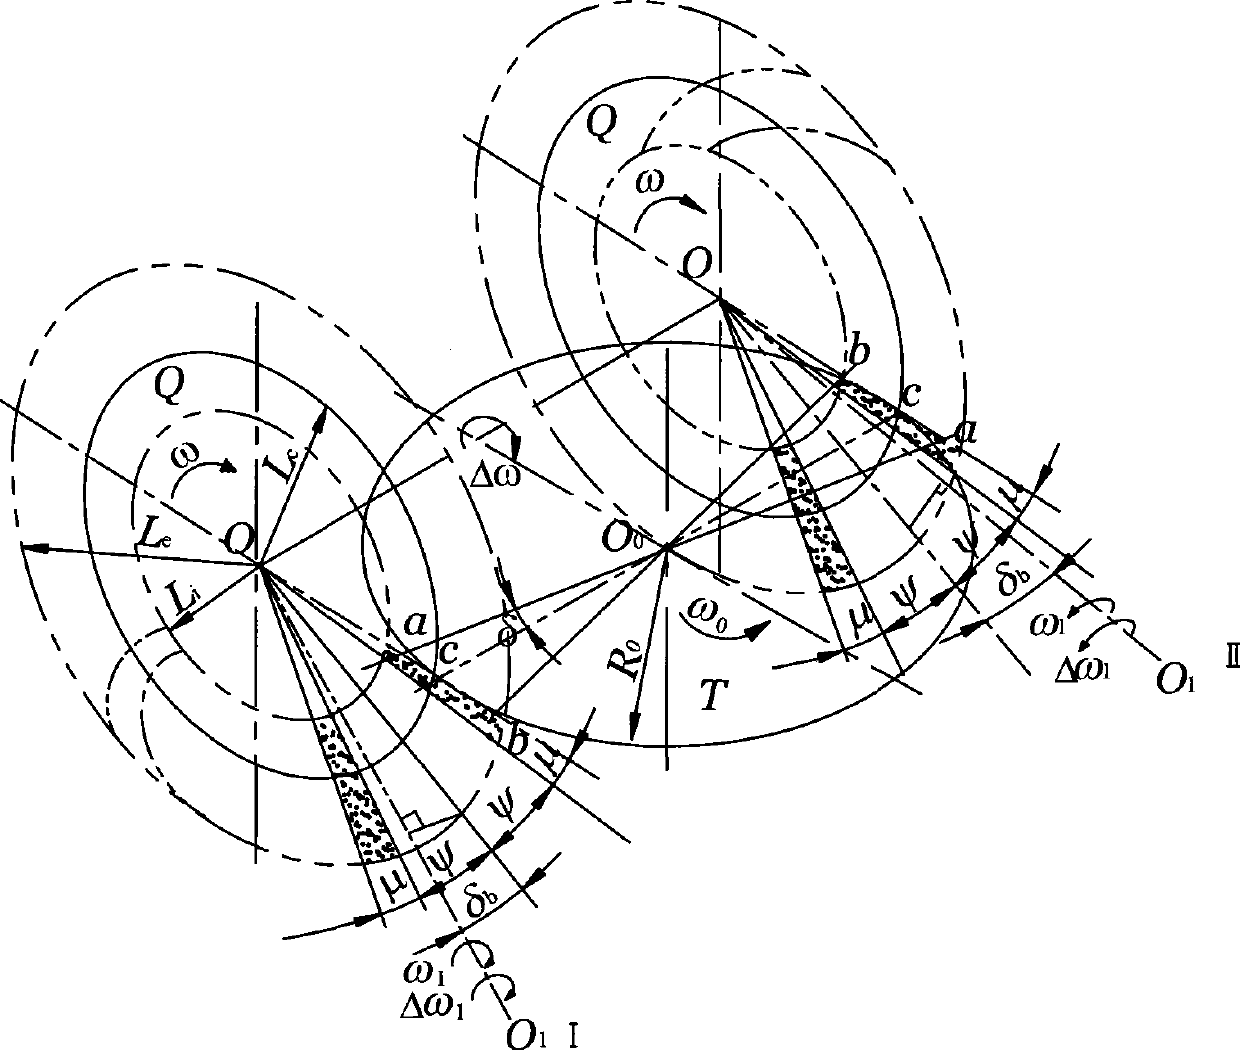 Spherical involute spiral Archimedes spiral bevel gear cutting method and machine tool